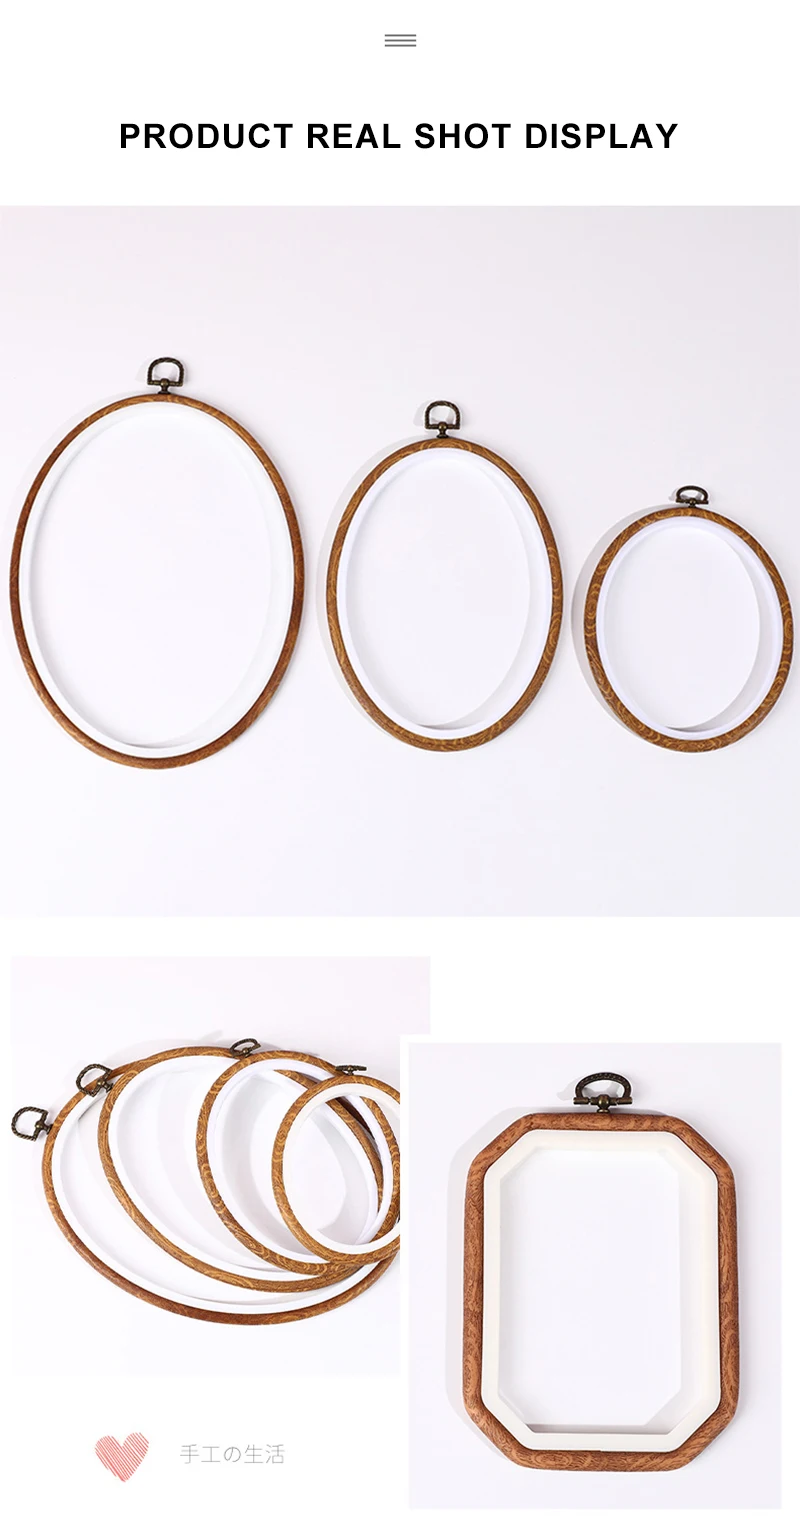 Embroidery Hoops Round Oval Square Cross Stitch Rack Plastic Embroidery  Hoop Frame Rings for DIY Cross Stitch Sewing Craft Tools